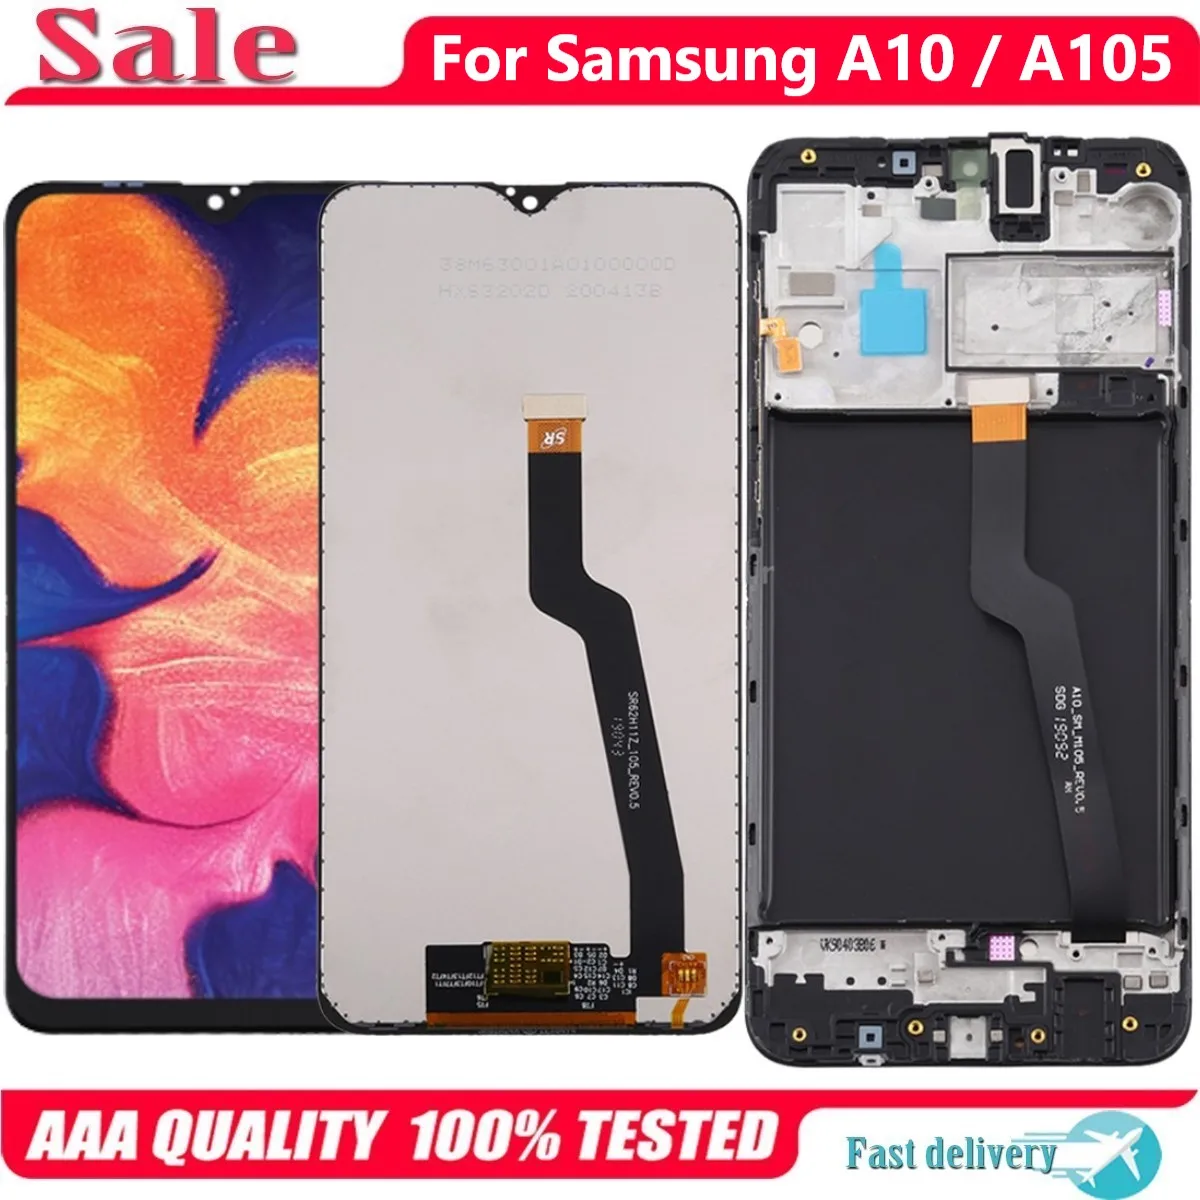 

Original Display For Samsung Galaxy A10 A105 LCD A105F SM-A105FN Display Touch Screen Replacement Digitizer Assembly 6.2"